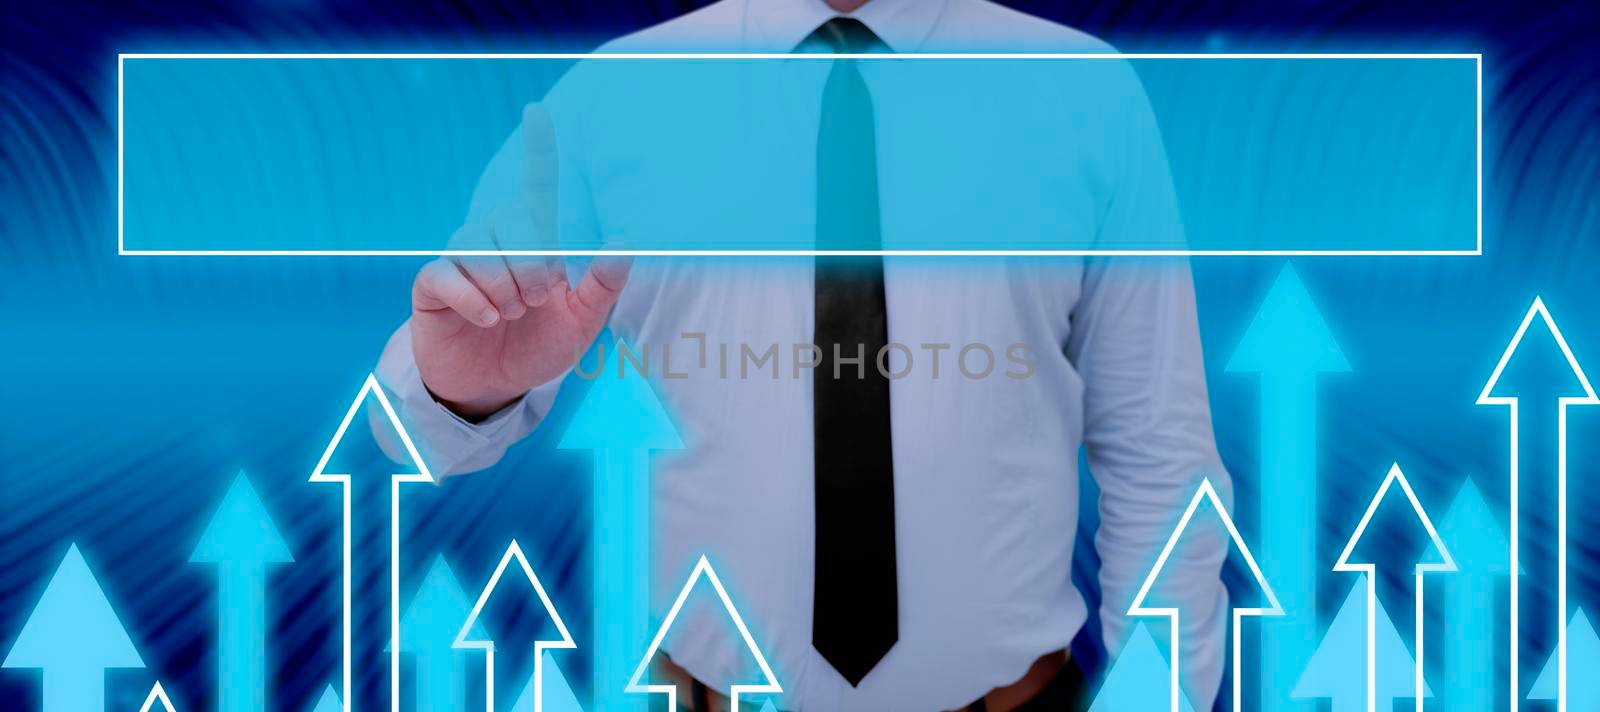 Businessman Pointing Frame With Arrows And Presenting Important Data.